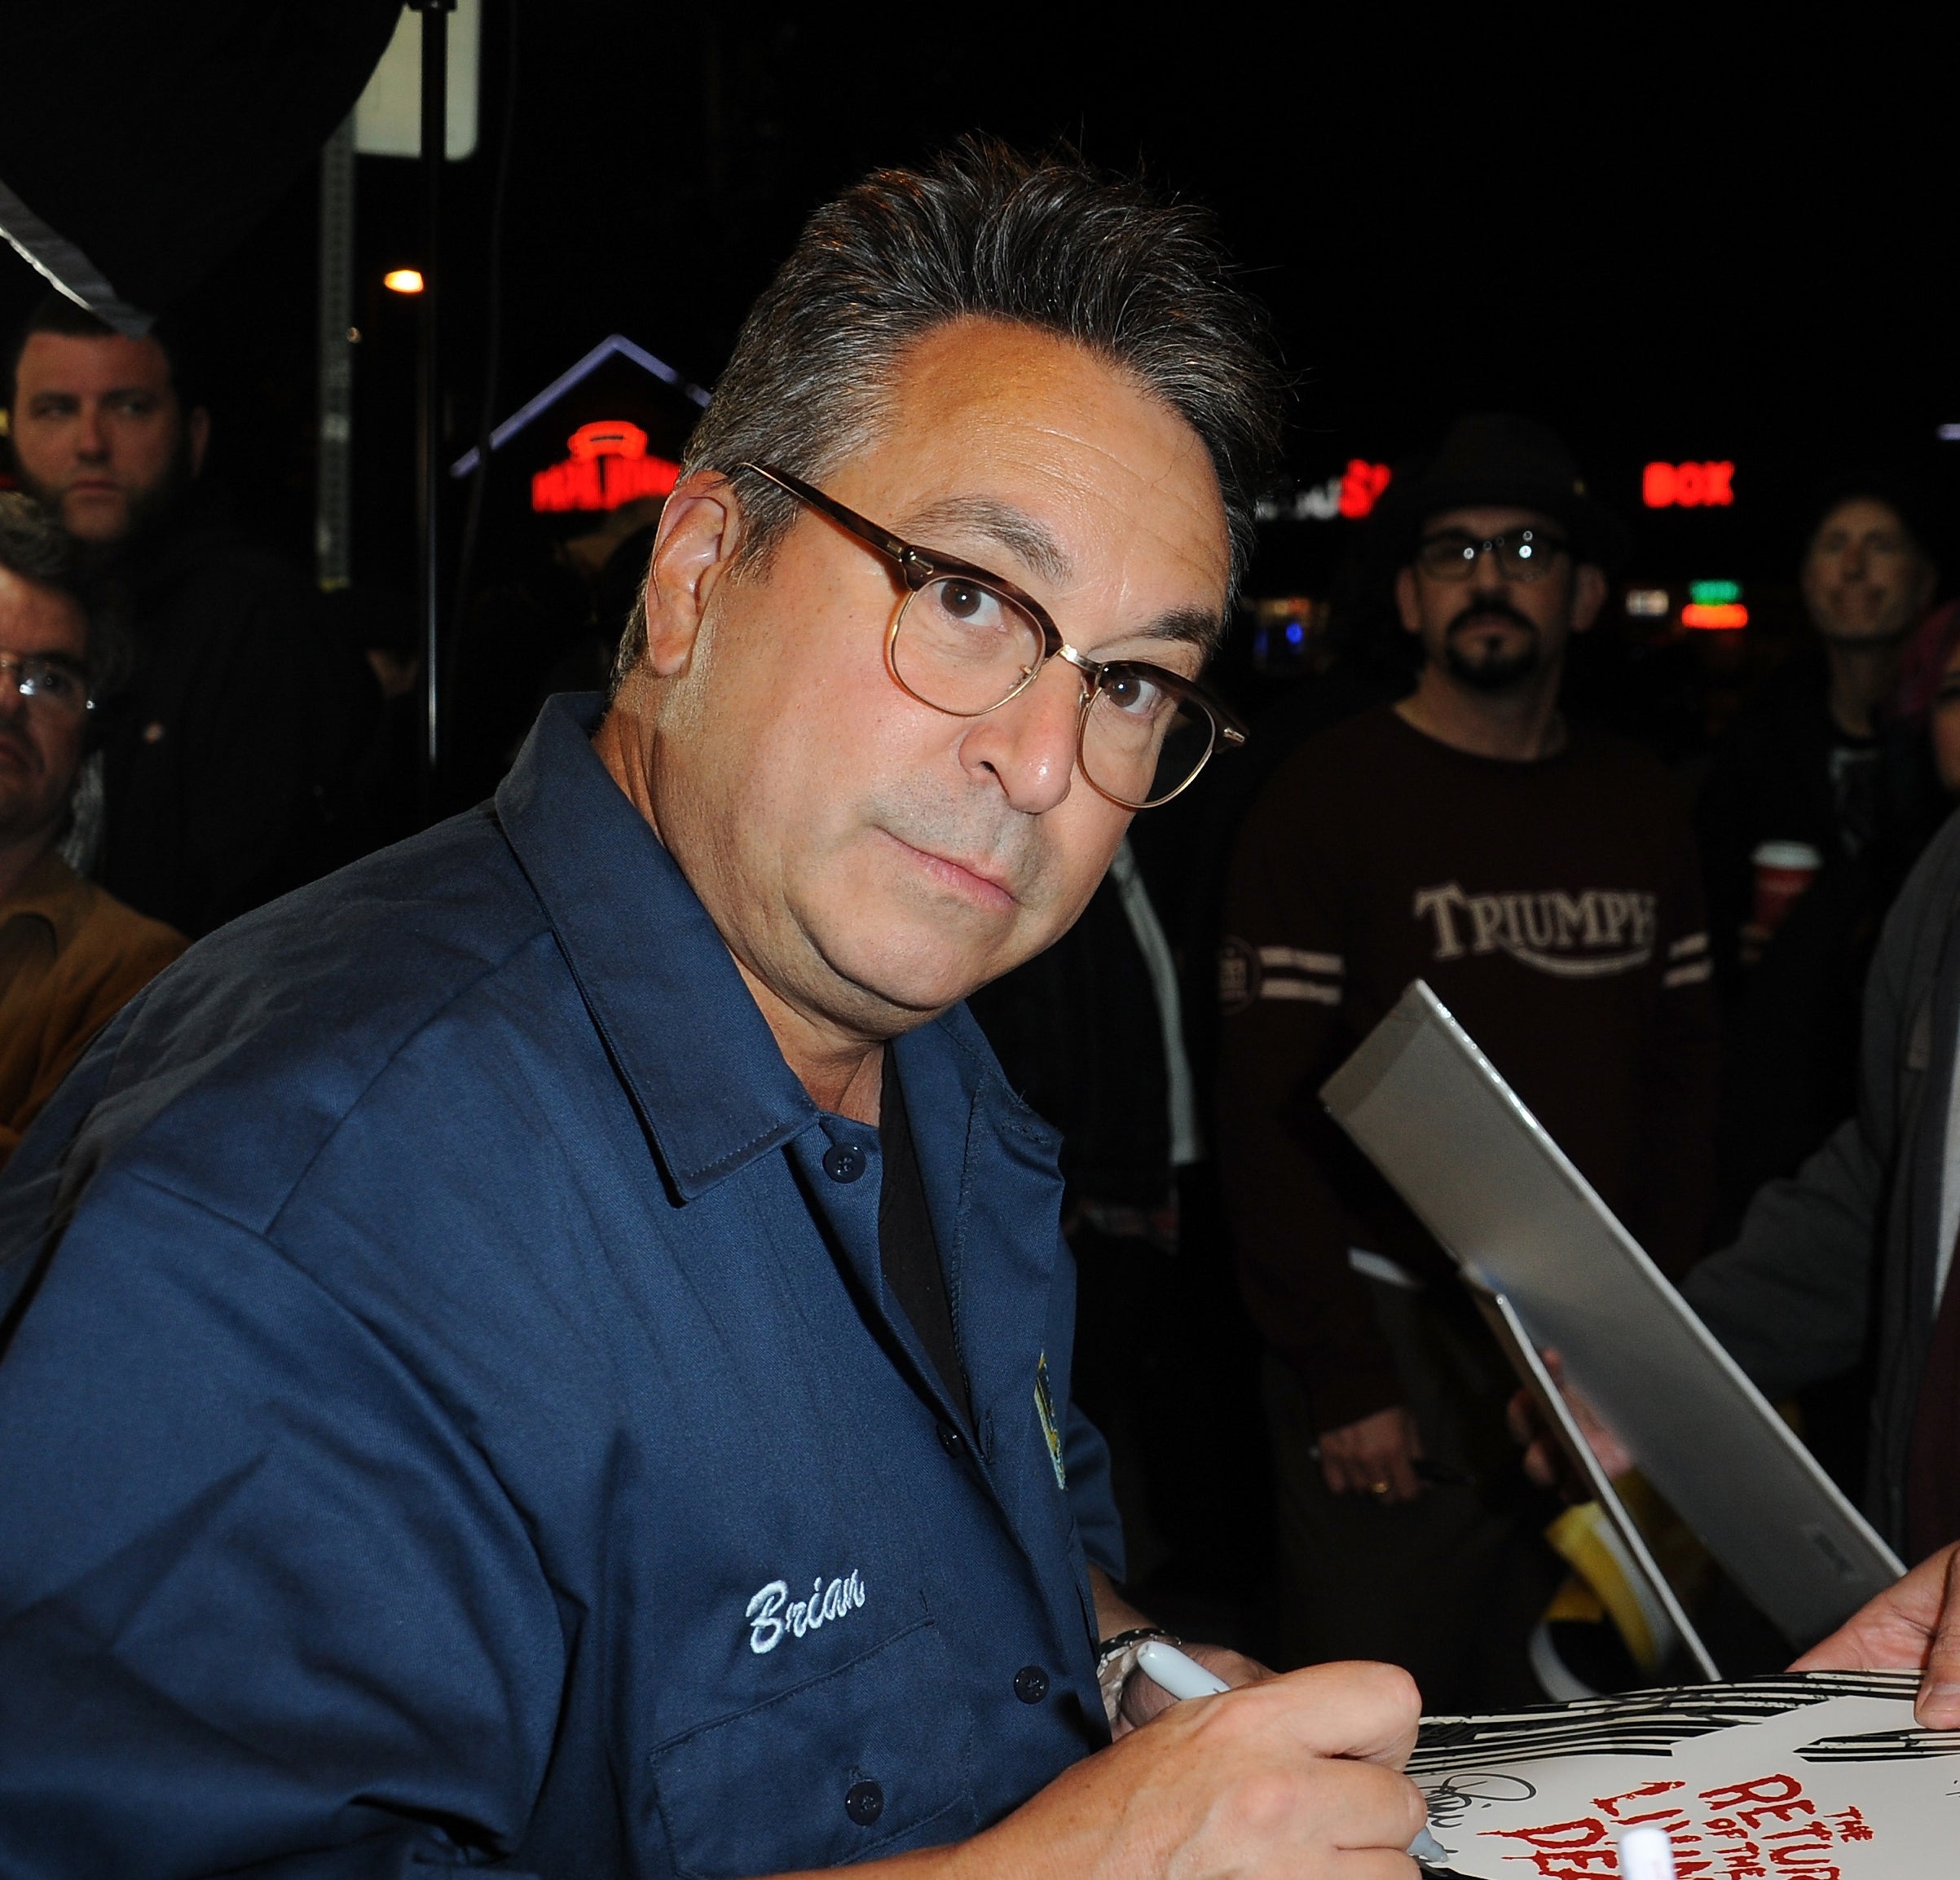 Brian Peck in glasses and blue shirt signing autographs for fans